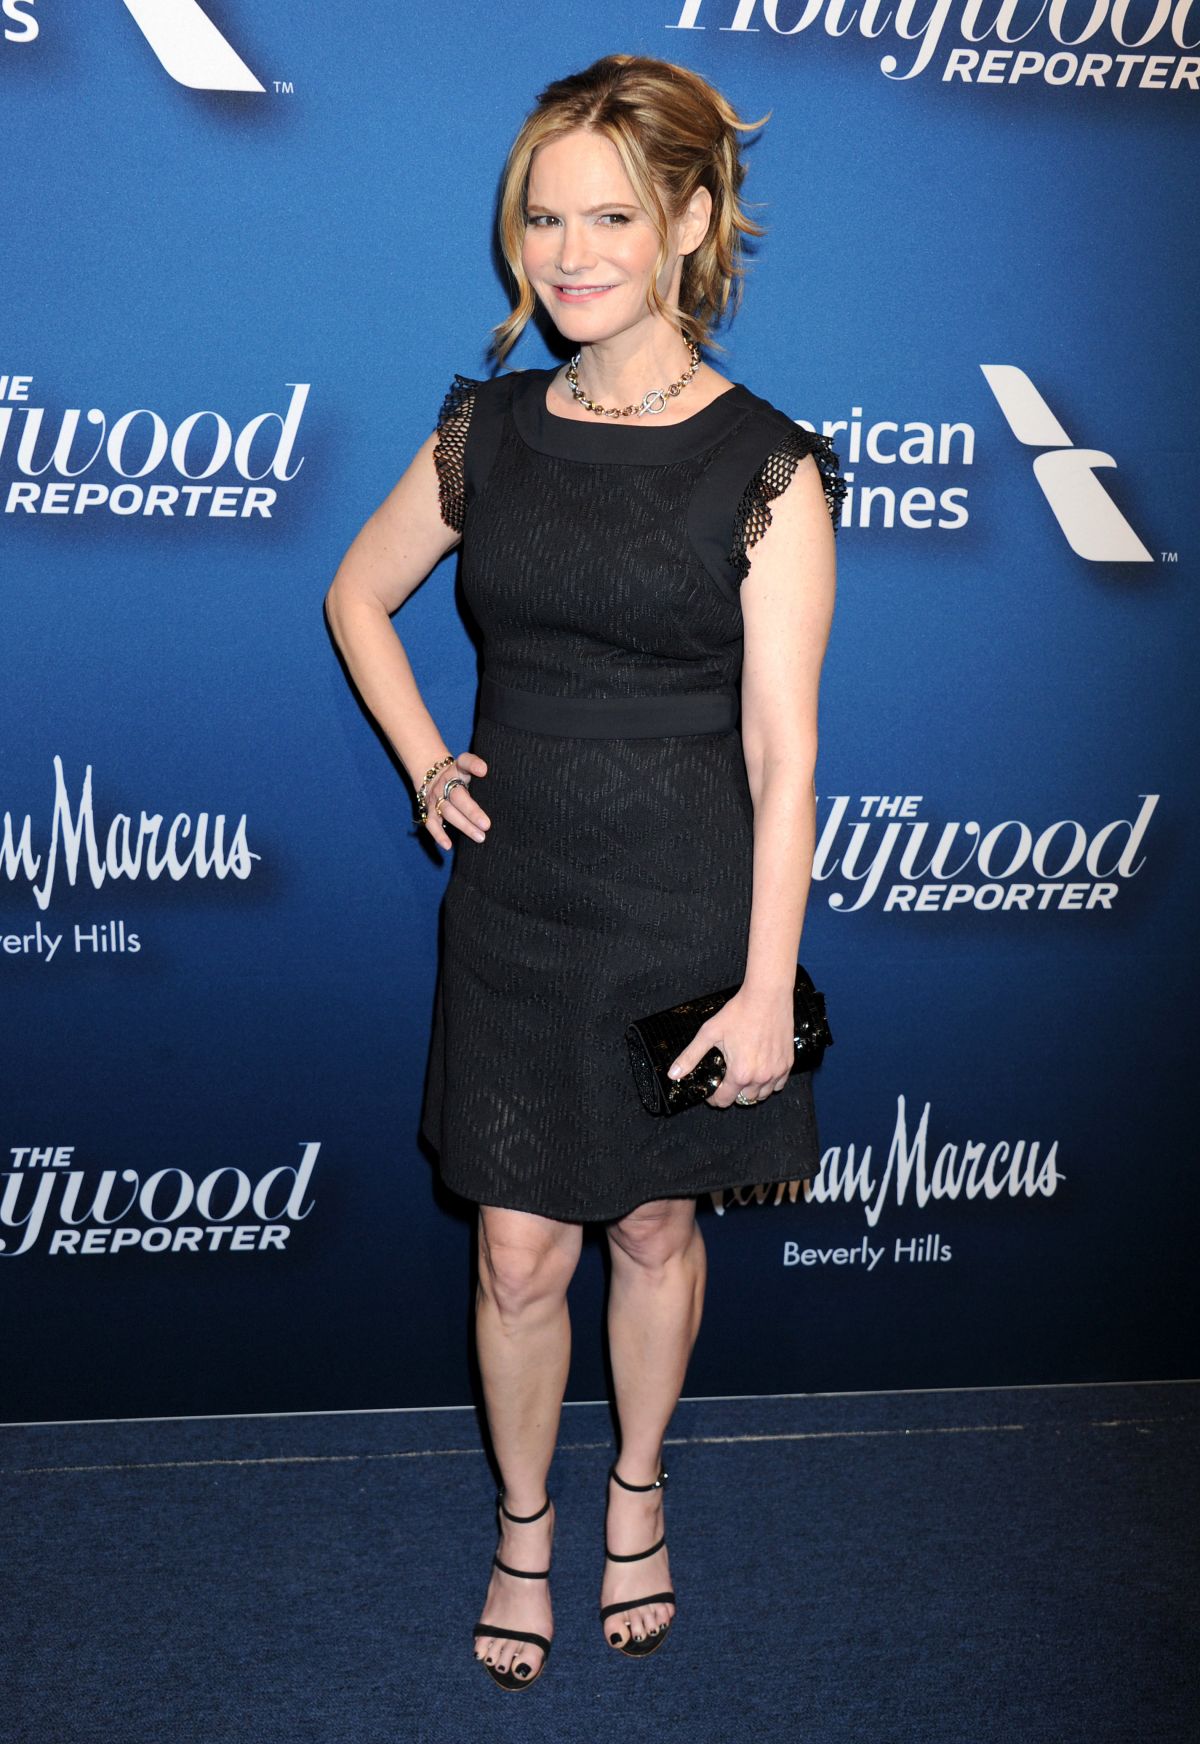 JENNIFER JASON LEIGH at Hollywood Reporter’s 4th Annual Nominees Night